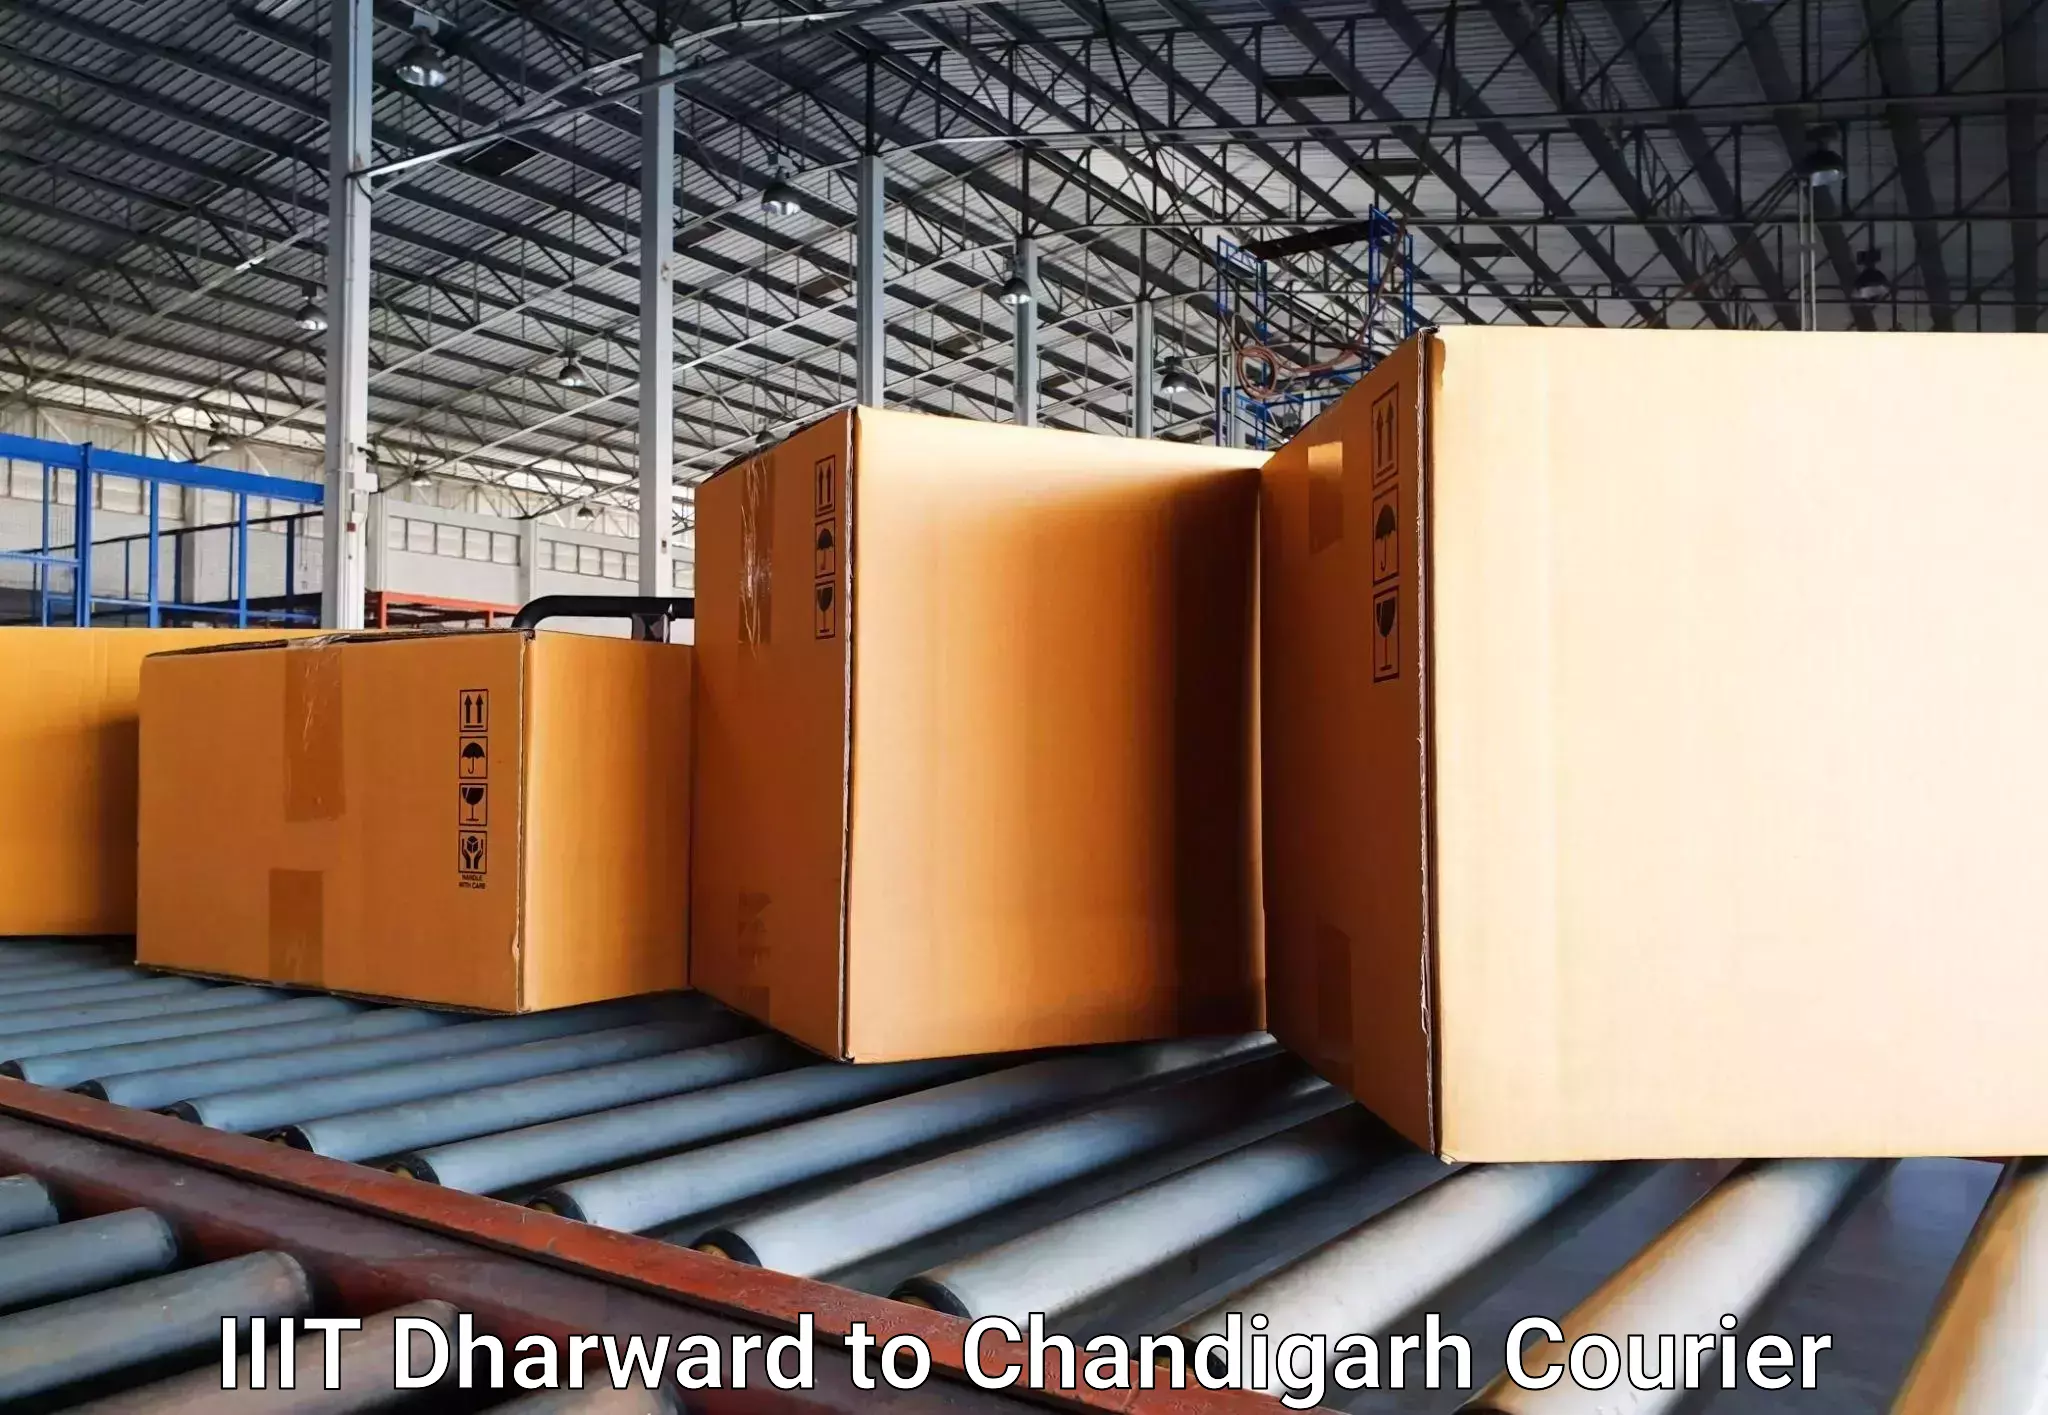 Luggage transport consulting IIIT Dharward to Chandigarh